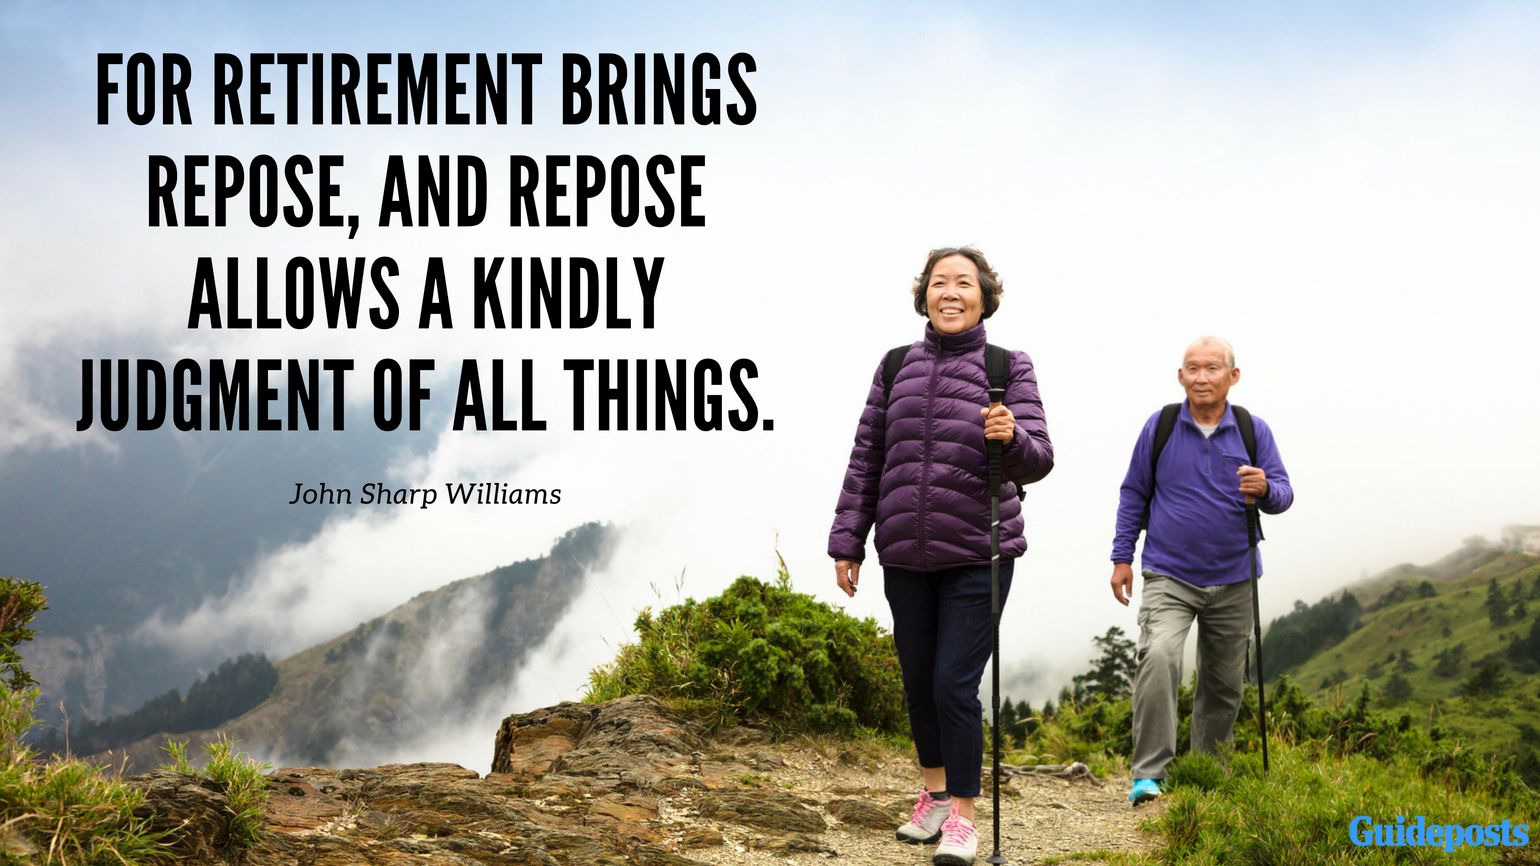 Inspirational Quotes for Retirement: “For retirement brings repose, and repose allows a kindly judgment of all things.” – John Sharp Williams Better Living Life Advice